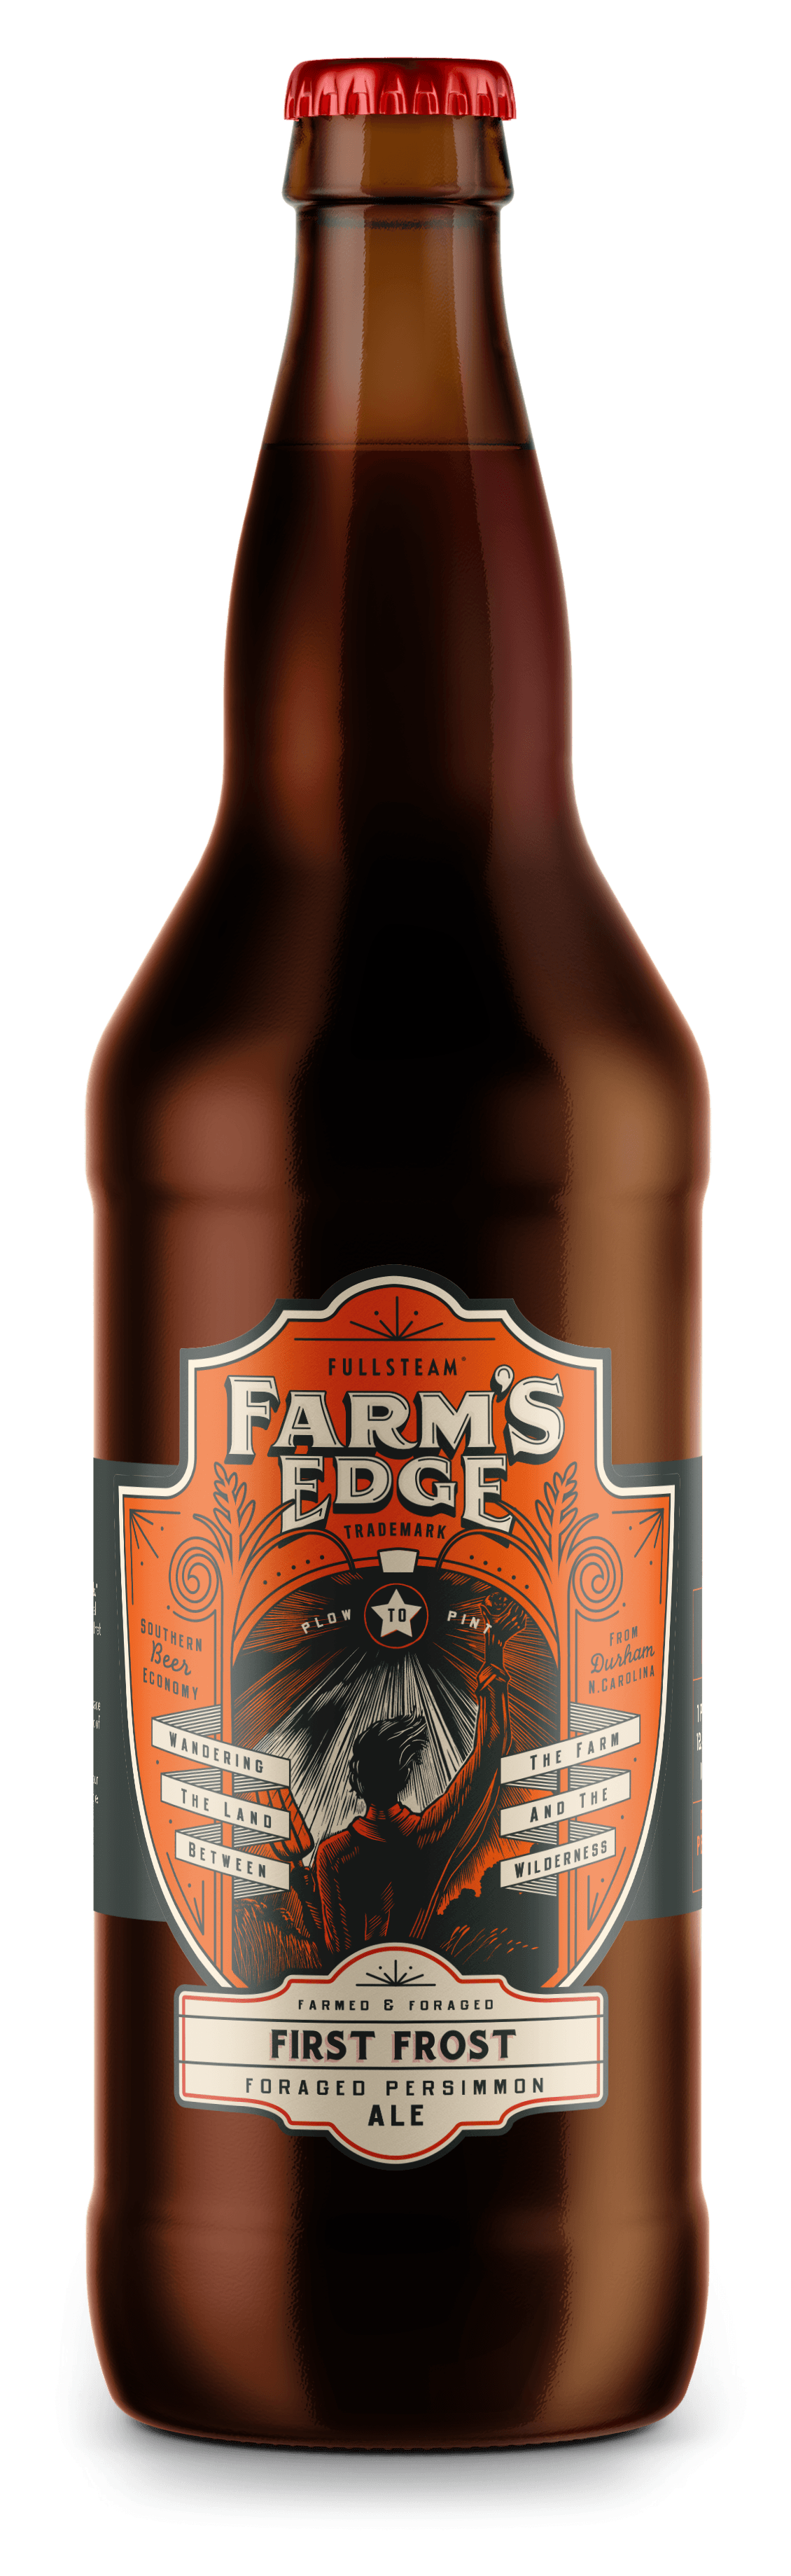 Farm's Edge: First Frost - Beer - Fullsteam Brewery